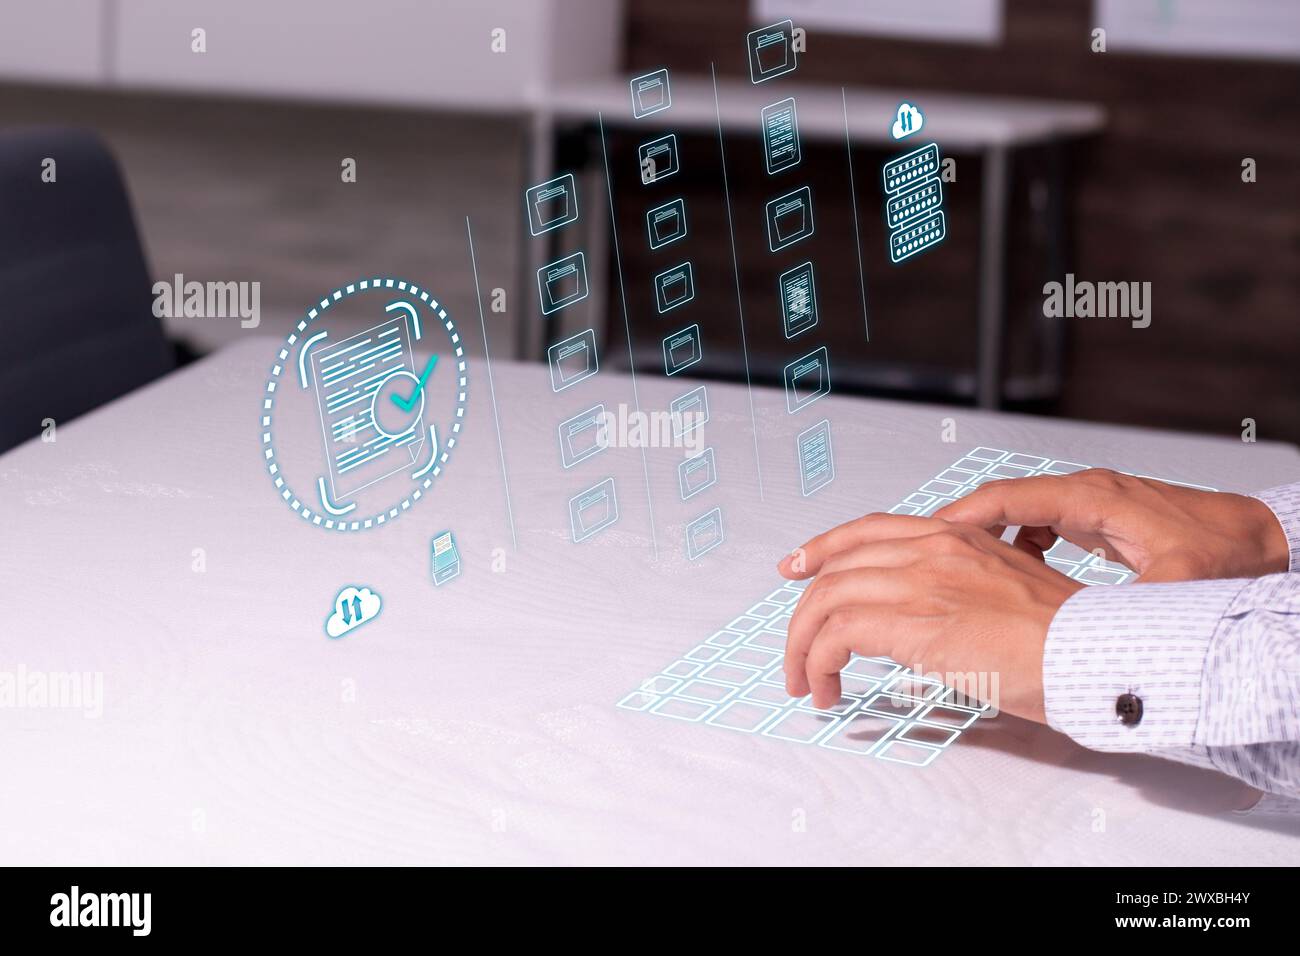 Business person using a virtual reality computer to manage business documents, cloud storage, record keeping, database technology, file access, docume Stock Photo